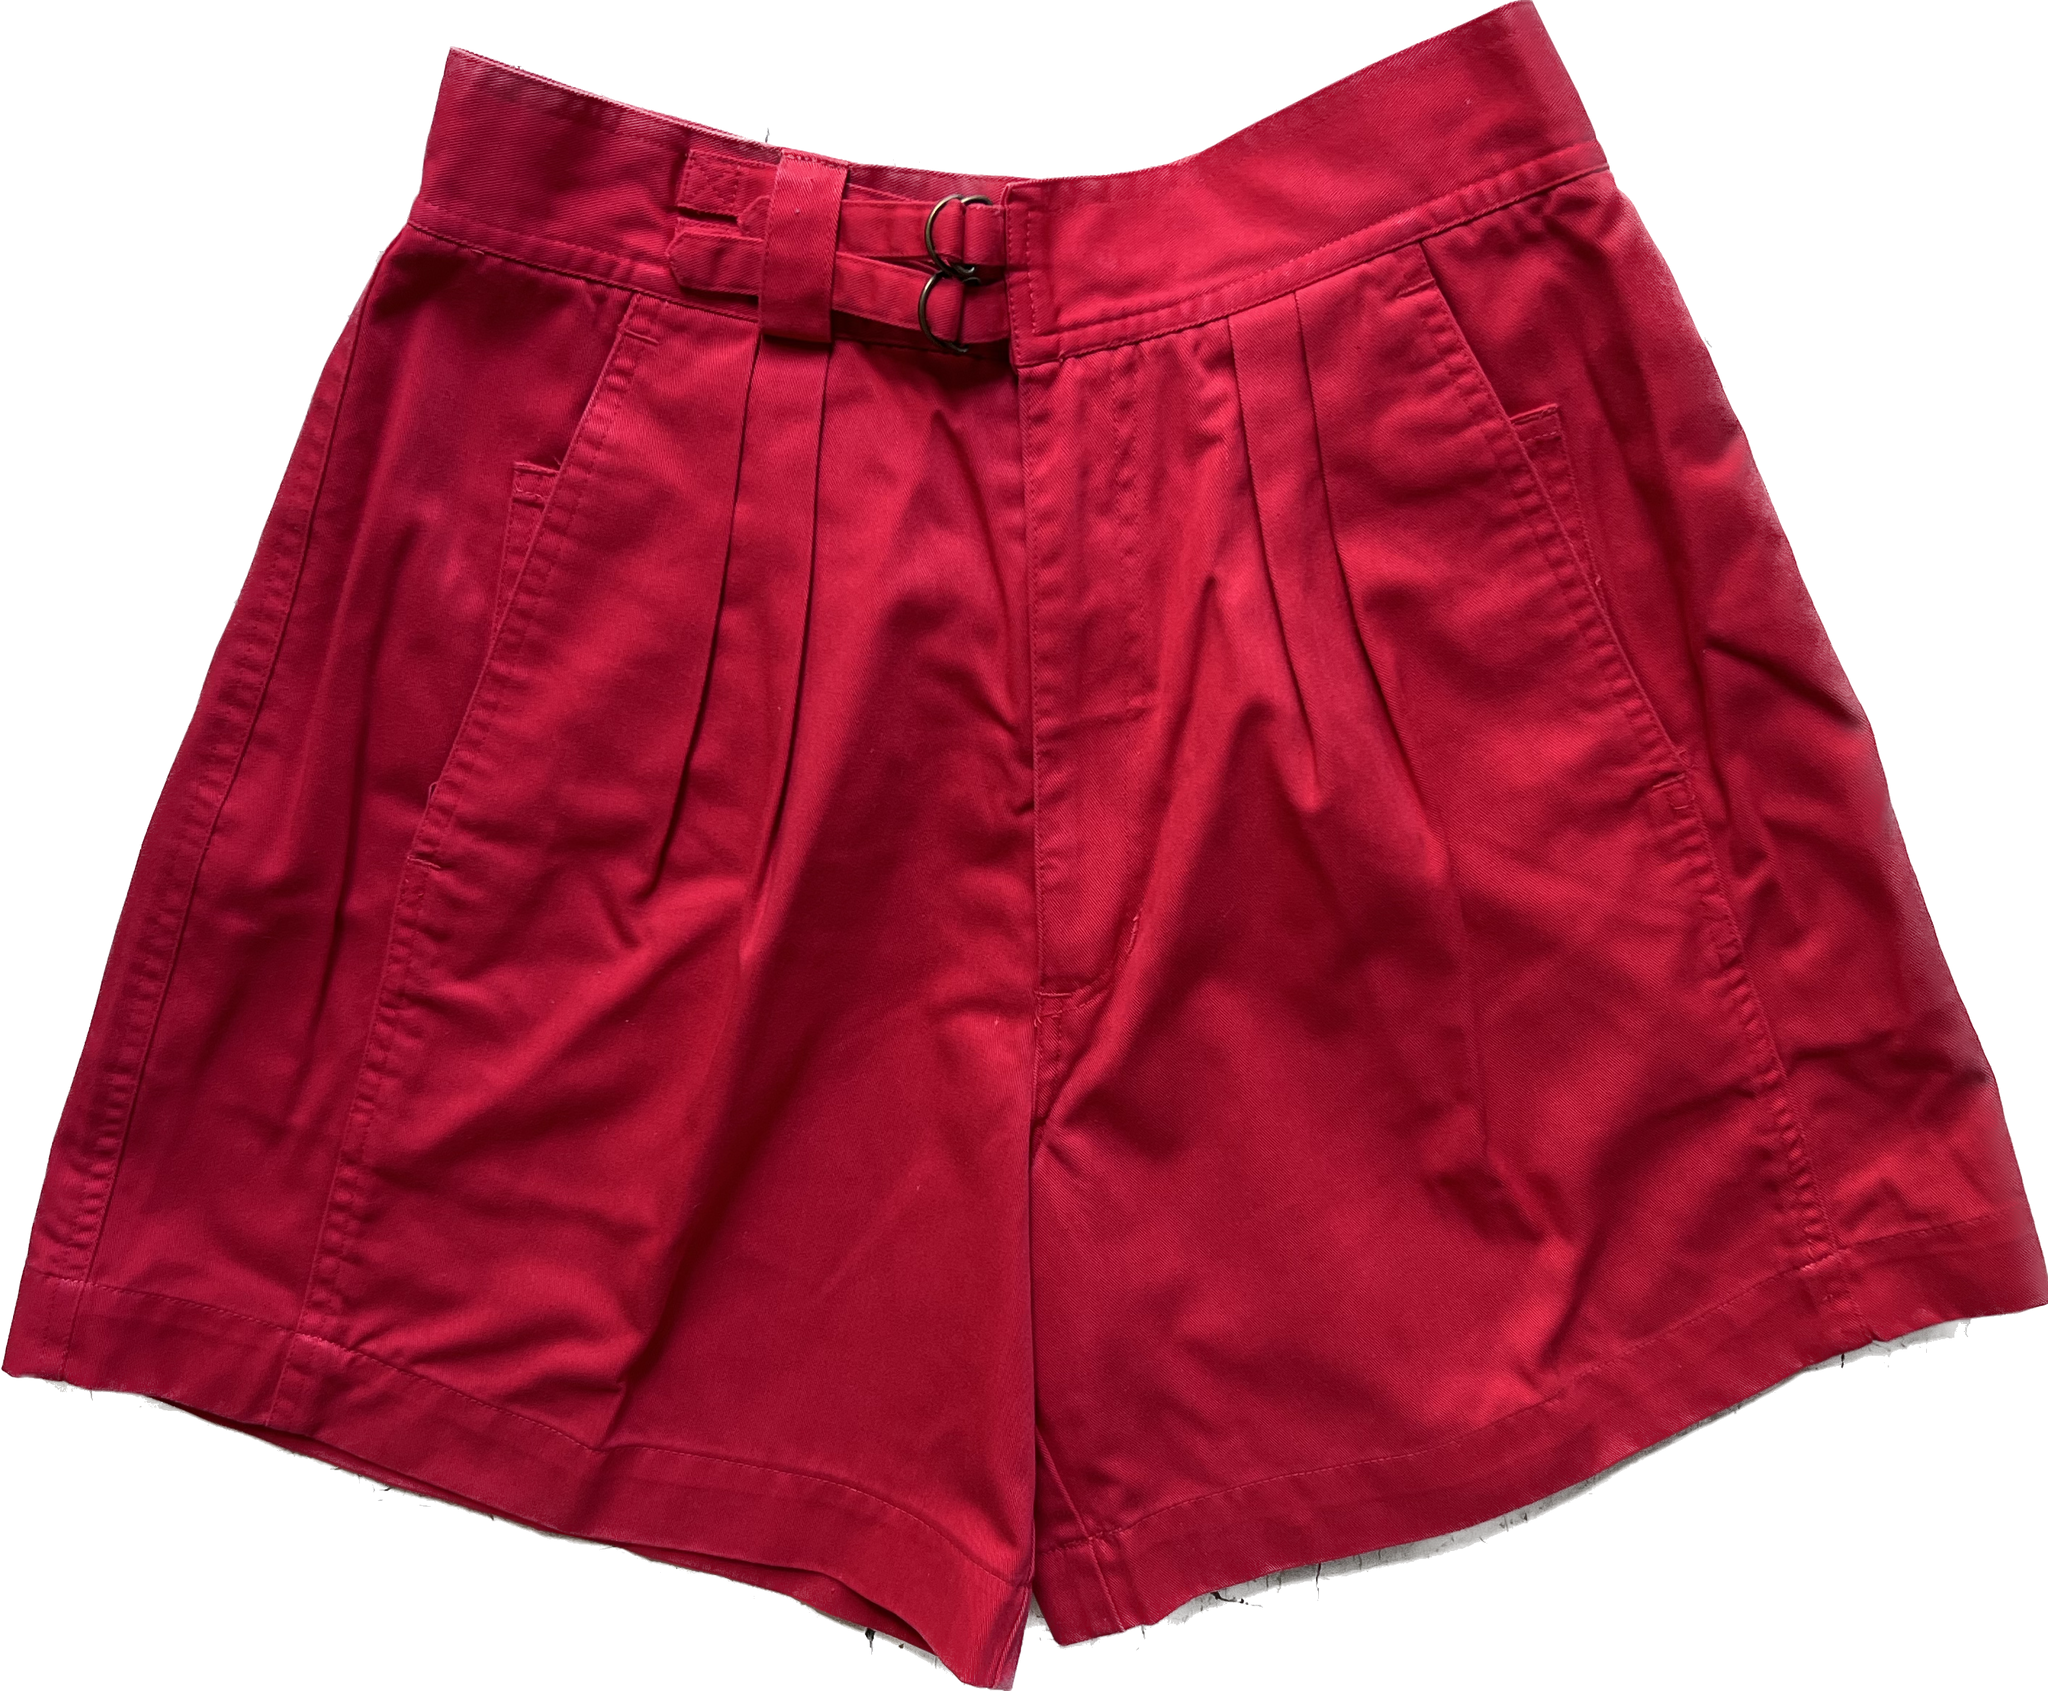 80s Harbor Lights Red Pleat Shorts     W28